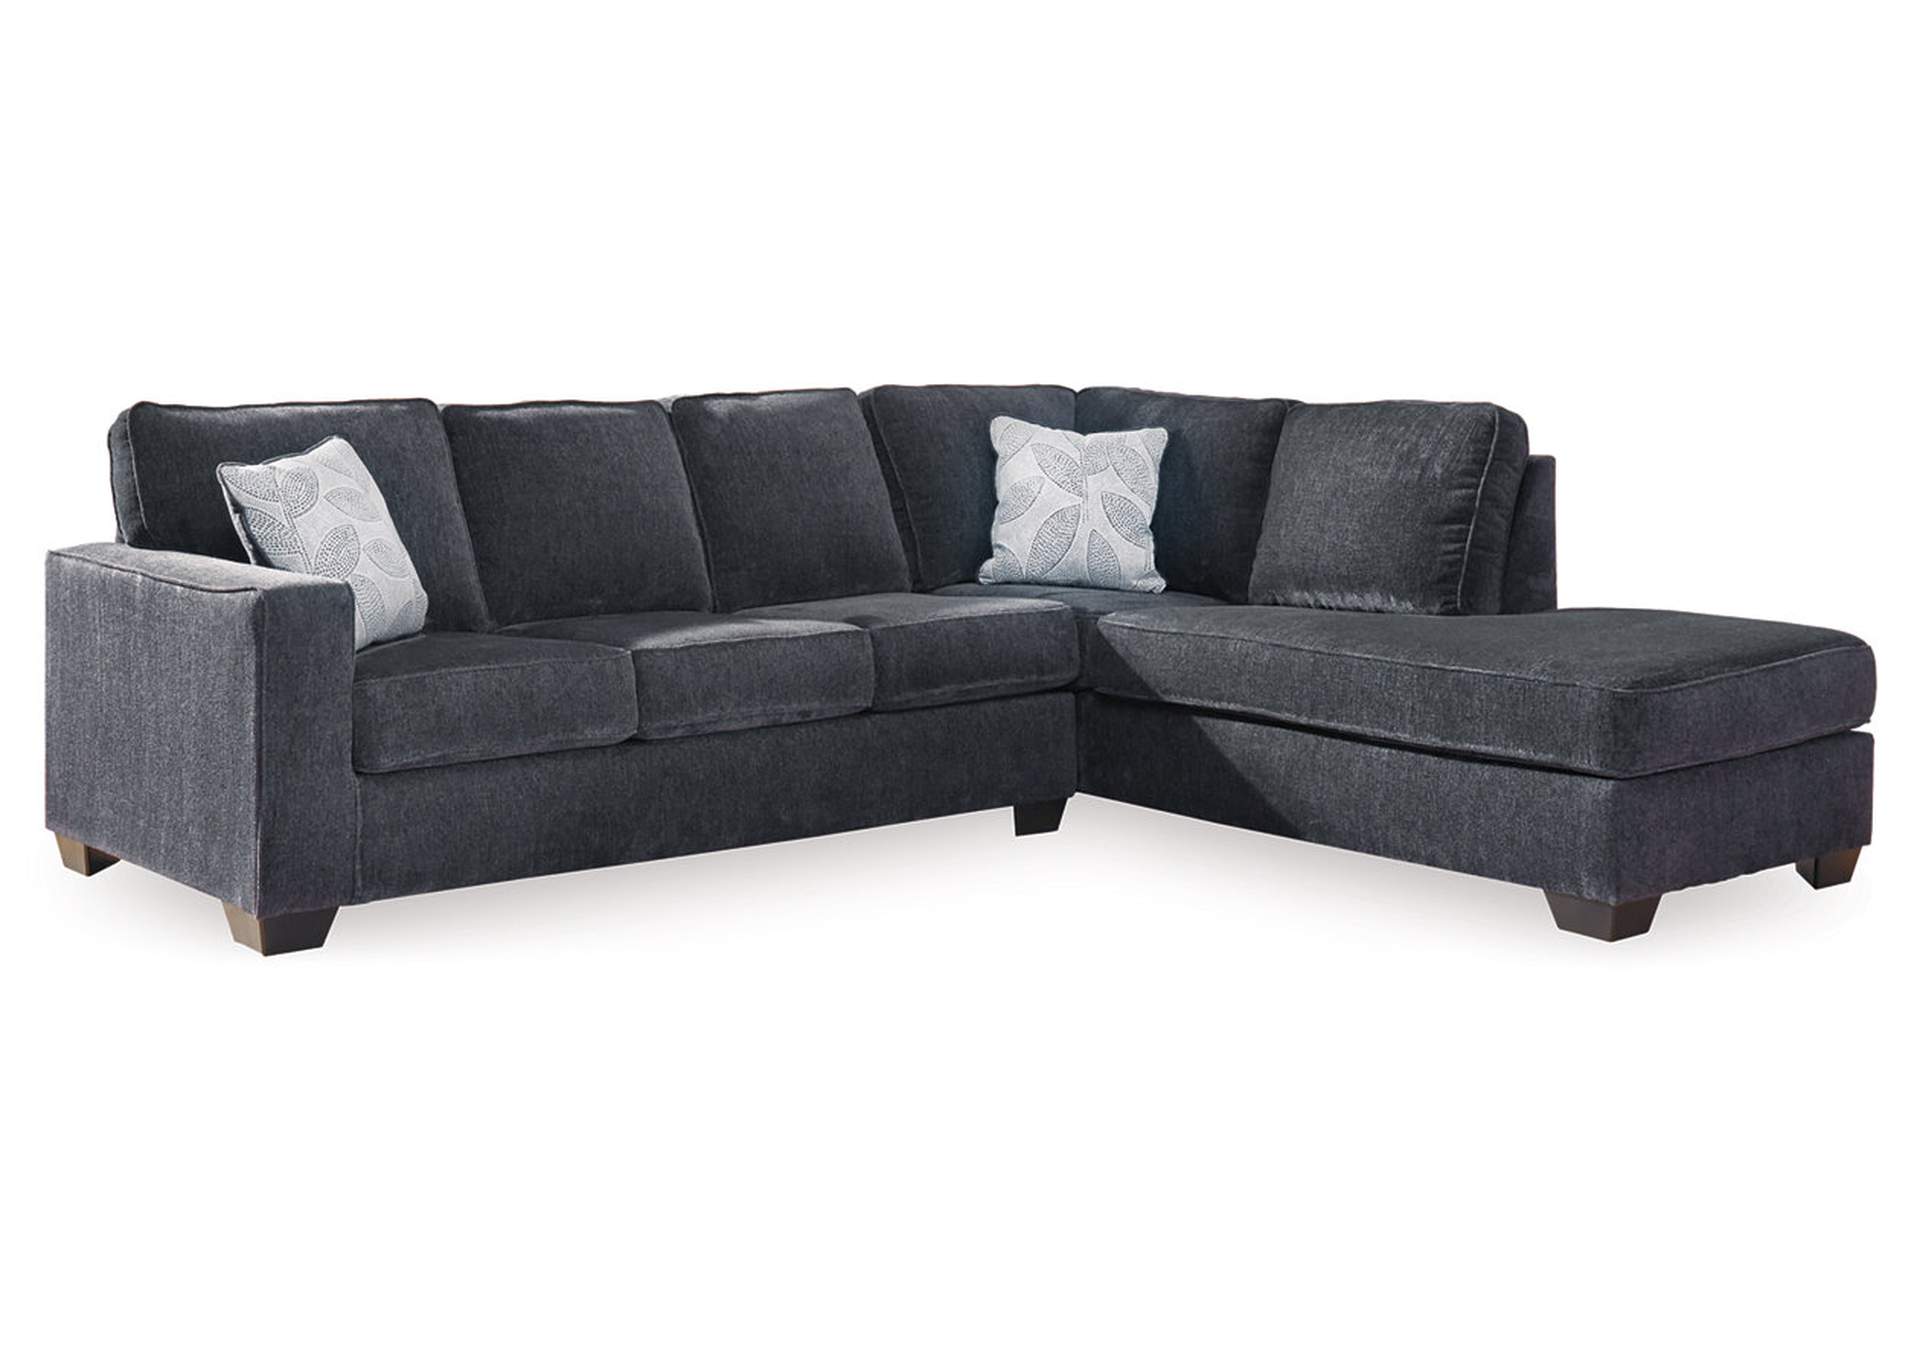 Altari 2-Piece Sleeper Sectional with Chaise,Signature Design By Ashley